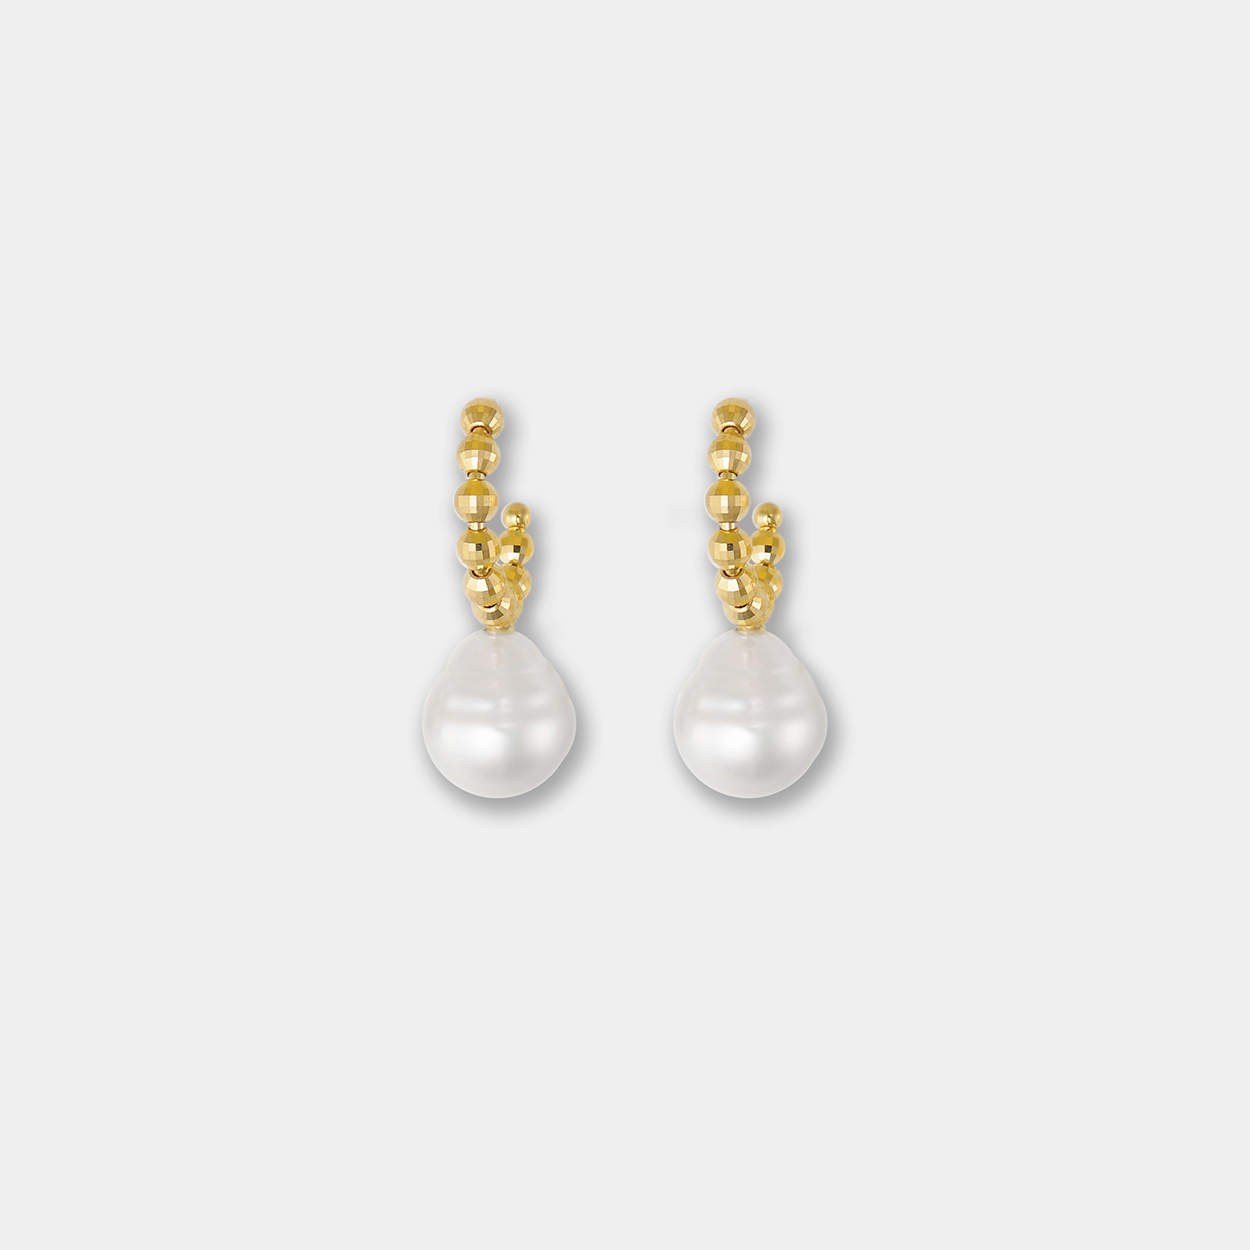 Enhance your elegance with these exquisite Pearl Dot x Gold Piercing earrings, a perfect blend of sophistication and style.